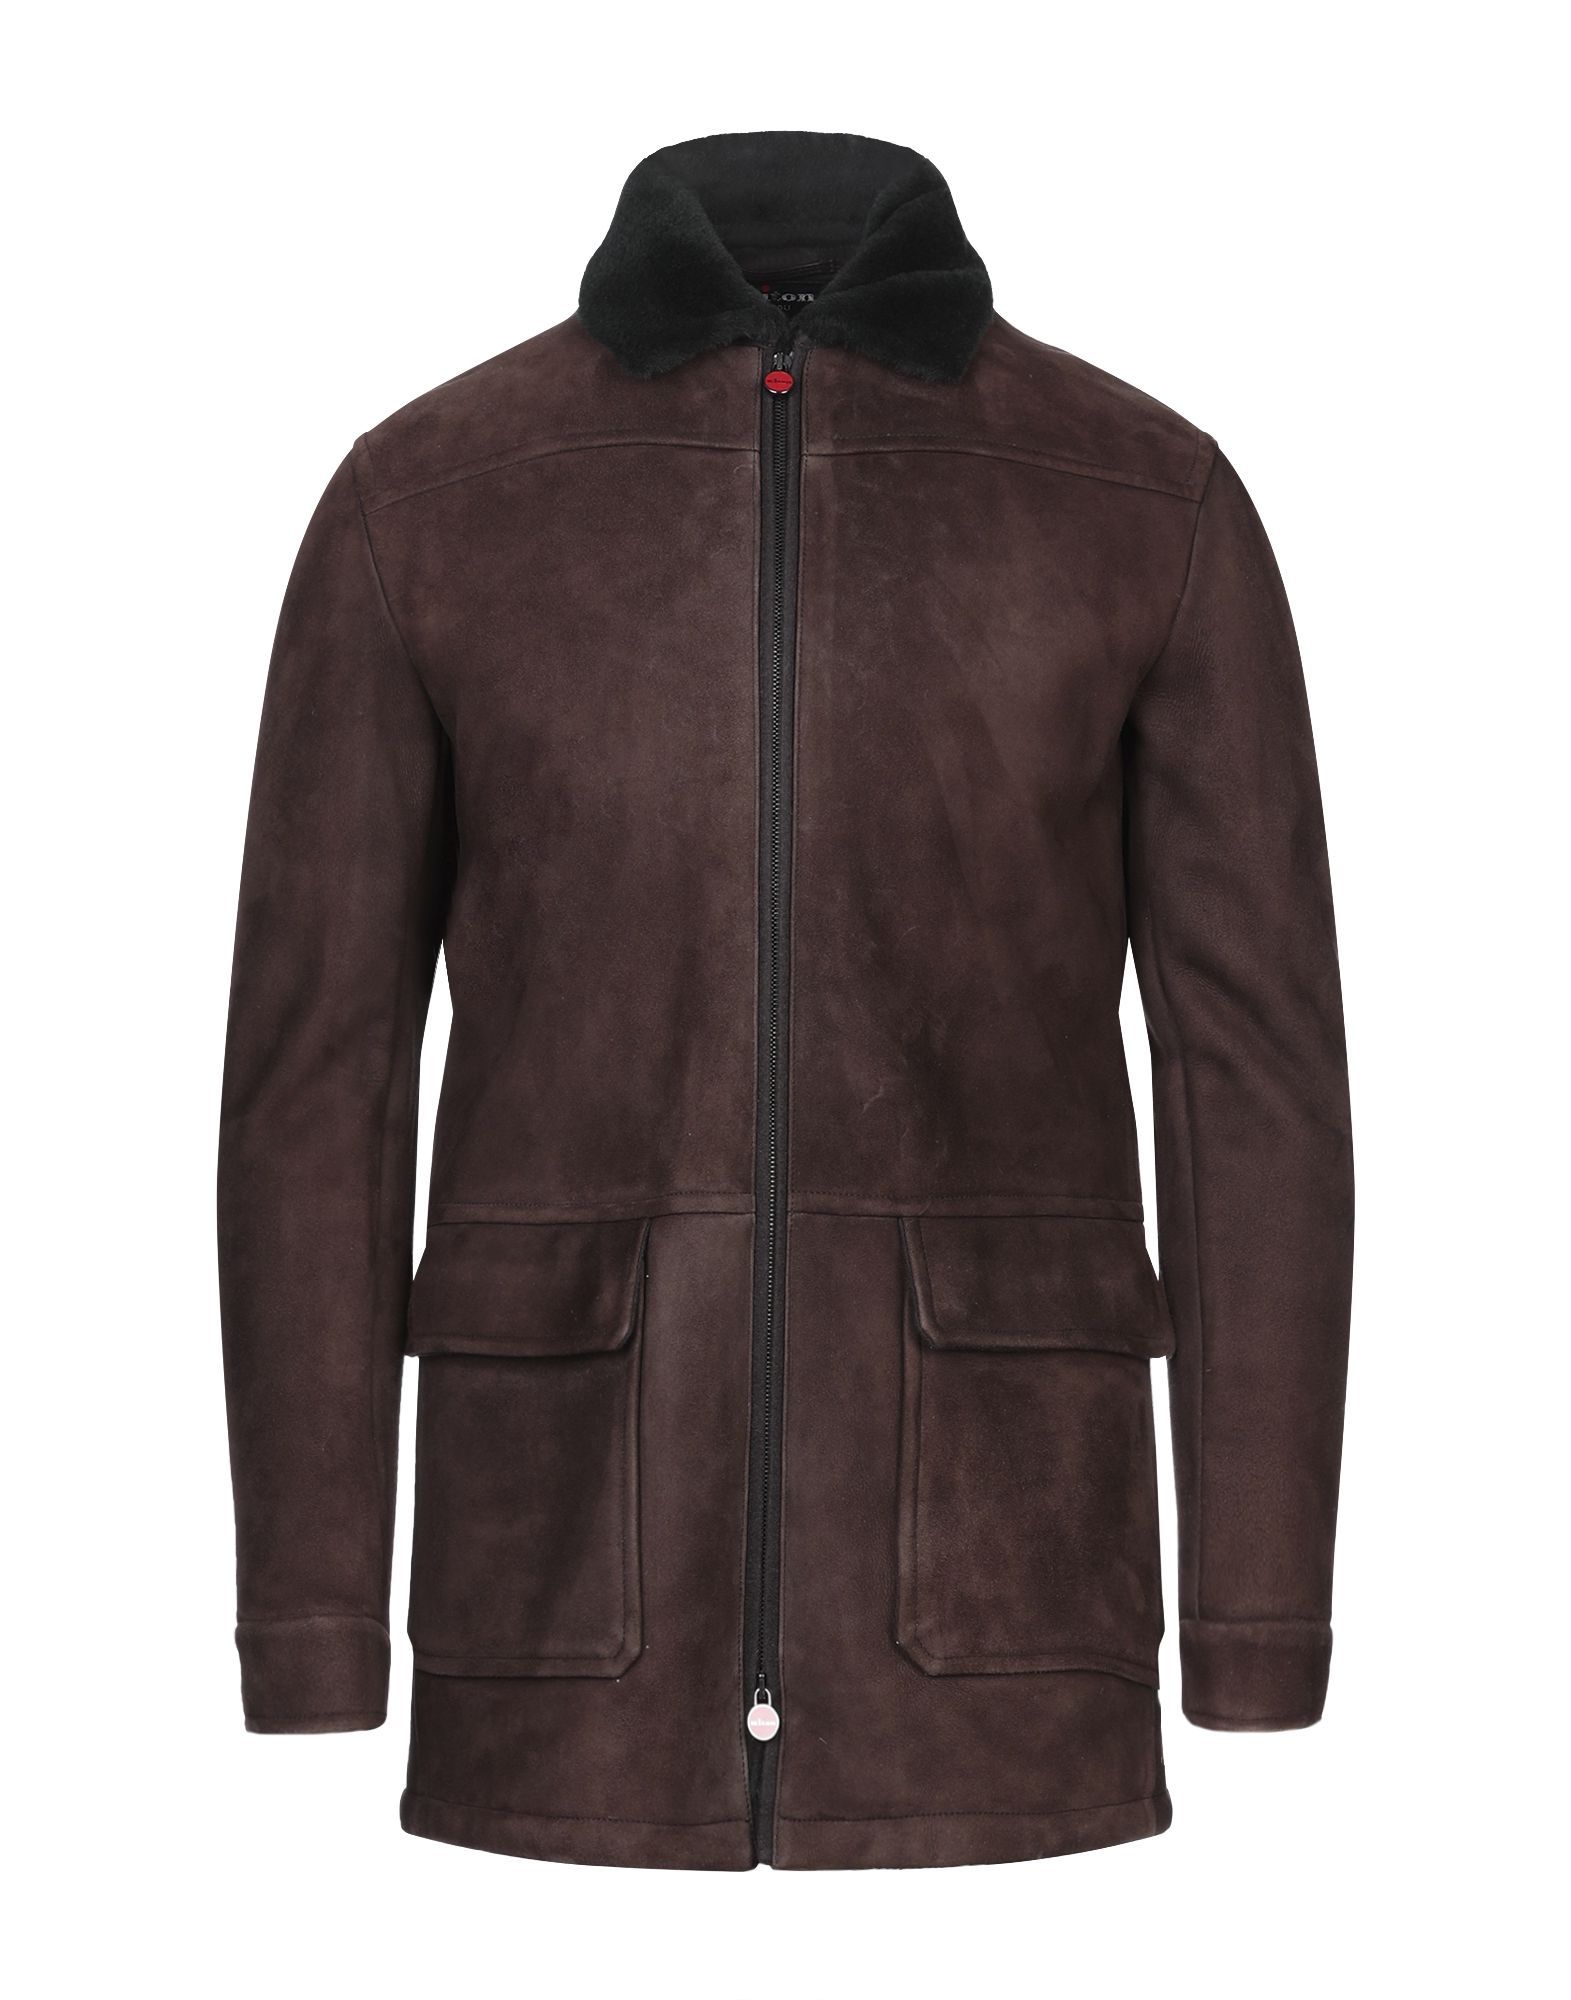 leather, suede effect, no appliqués, solid colour, single-breasted , zip, classic neckline, multipockets, two inside pockets, long sleeves, fur inner, contains non-textile parts of animal origin